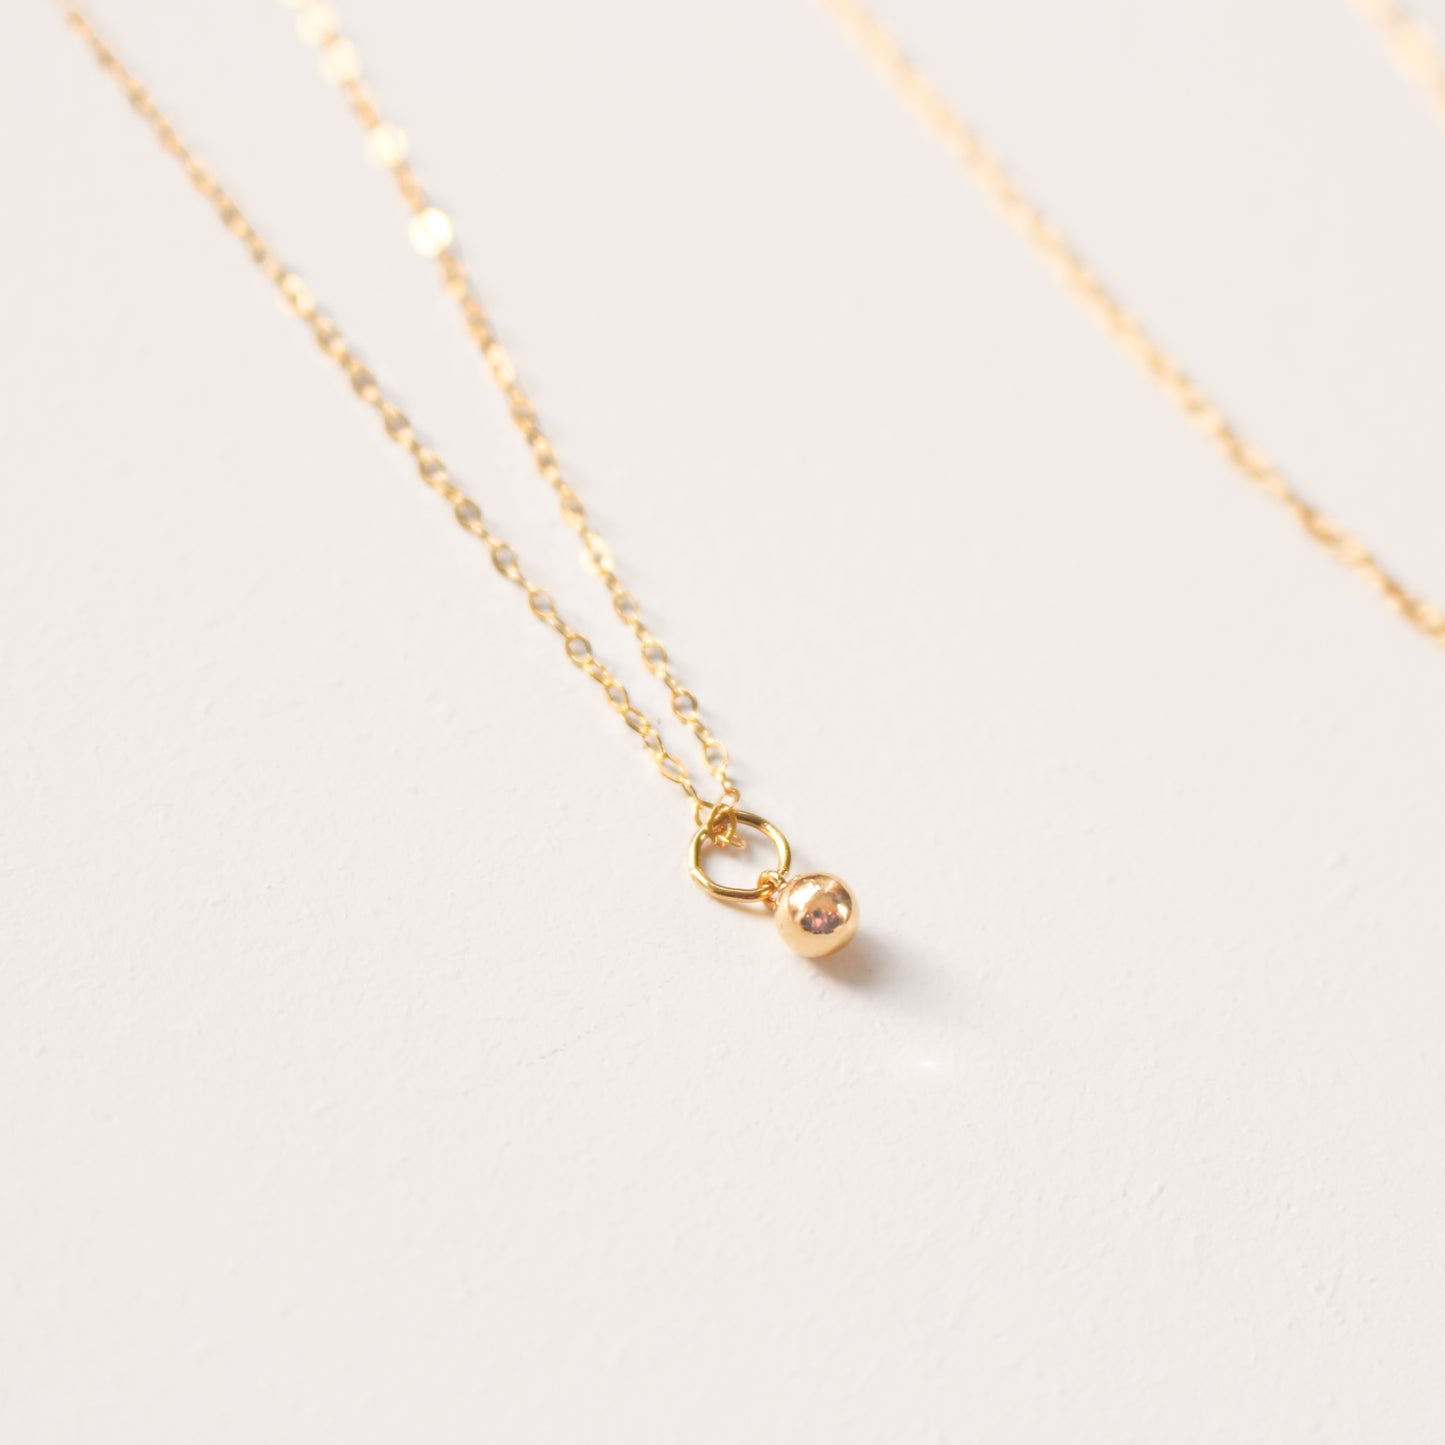 Aesthetic 14K Gold Filled Ball Necklace ∙ 4mm